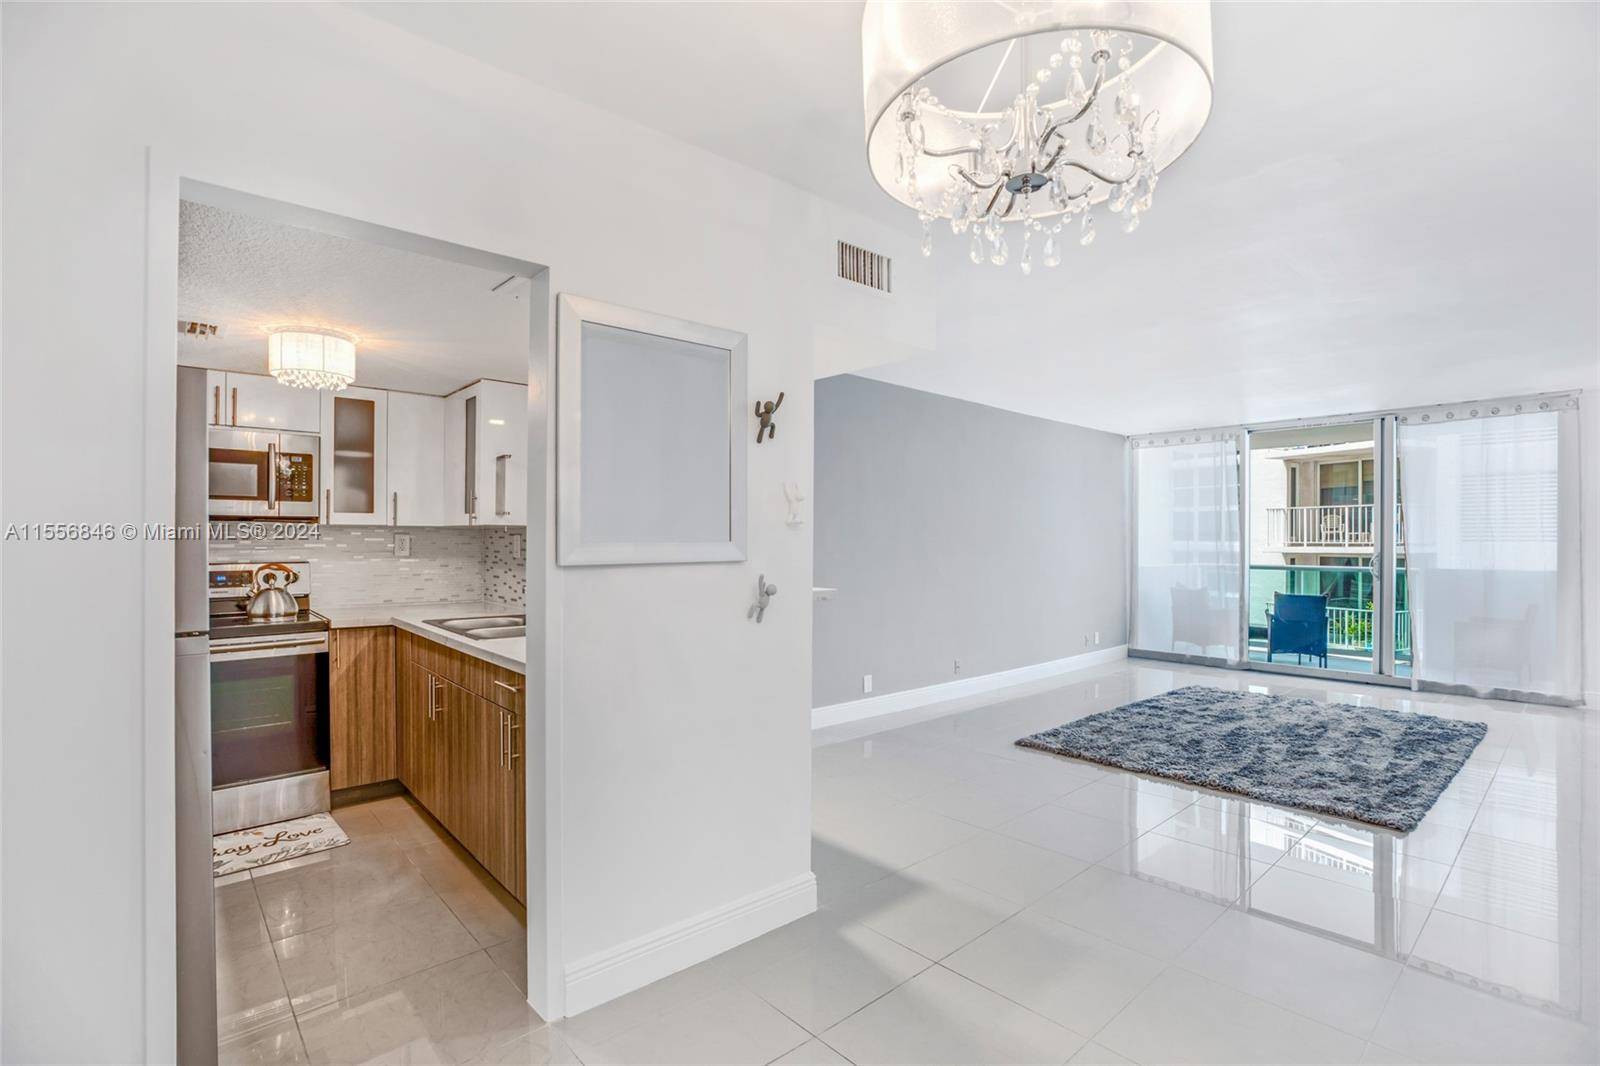 Beautifully remodeled spacious 1 1 with bay view in the desirable Mirador 1200 on West Ave, Miami Beach.